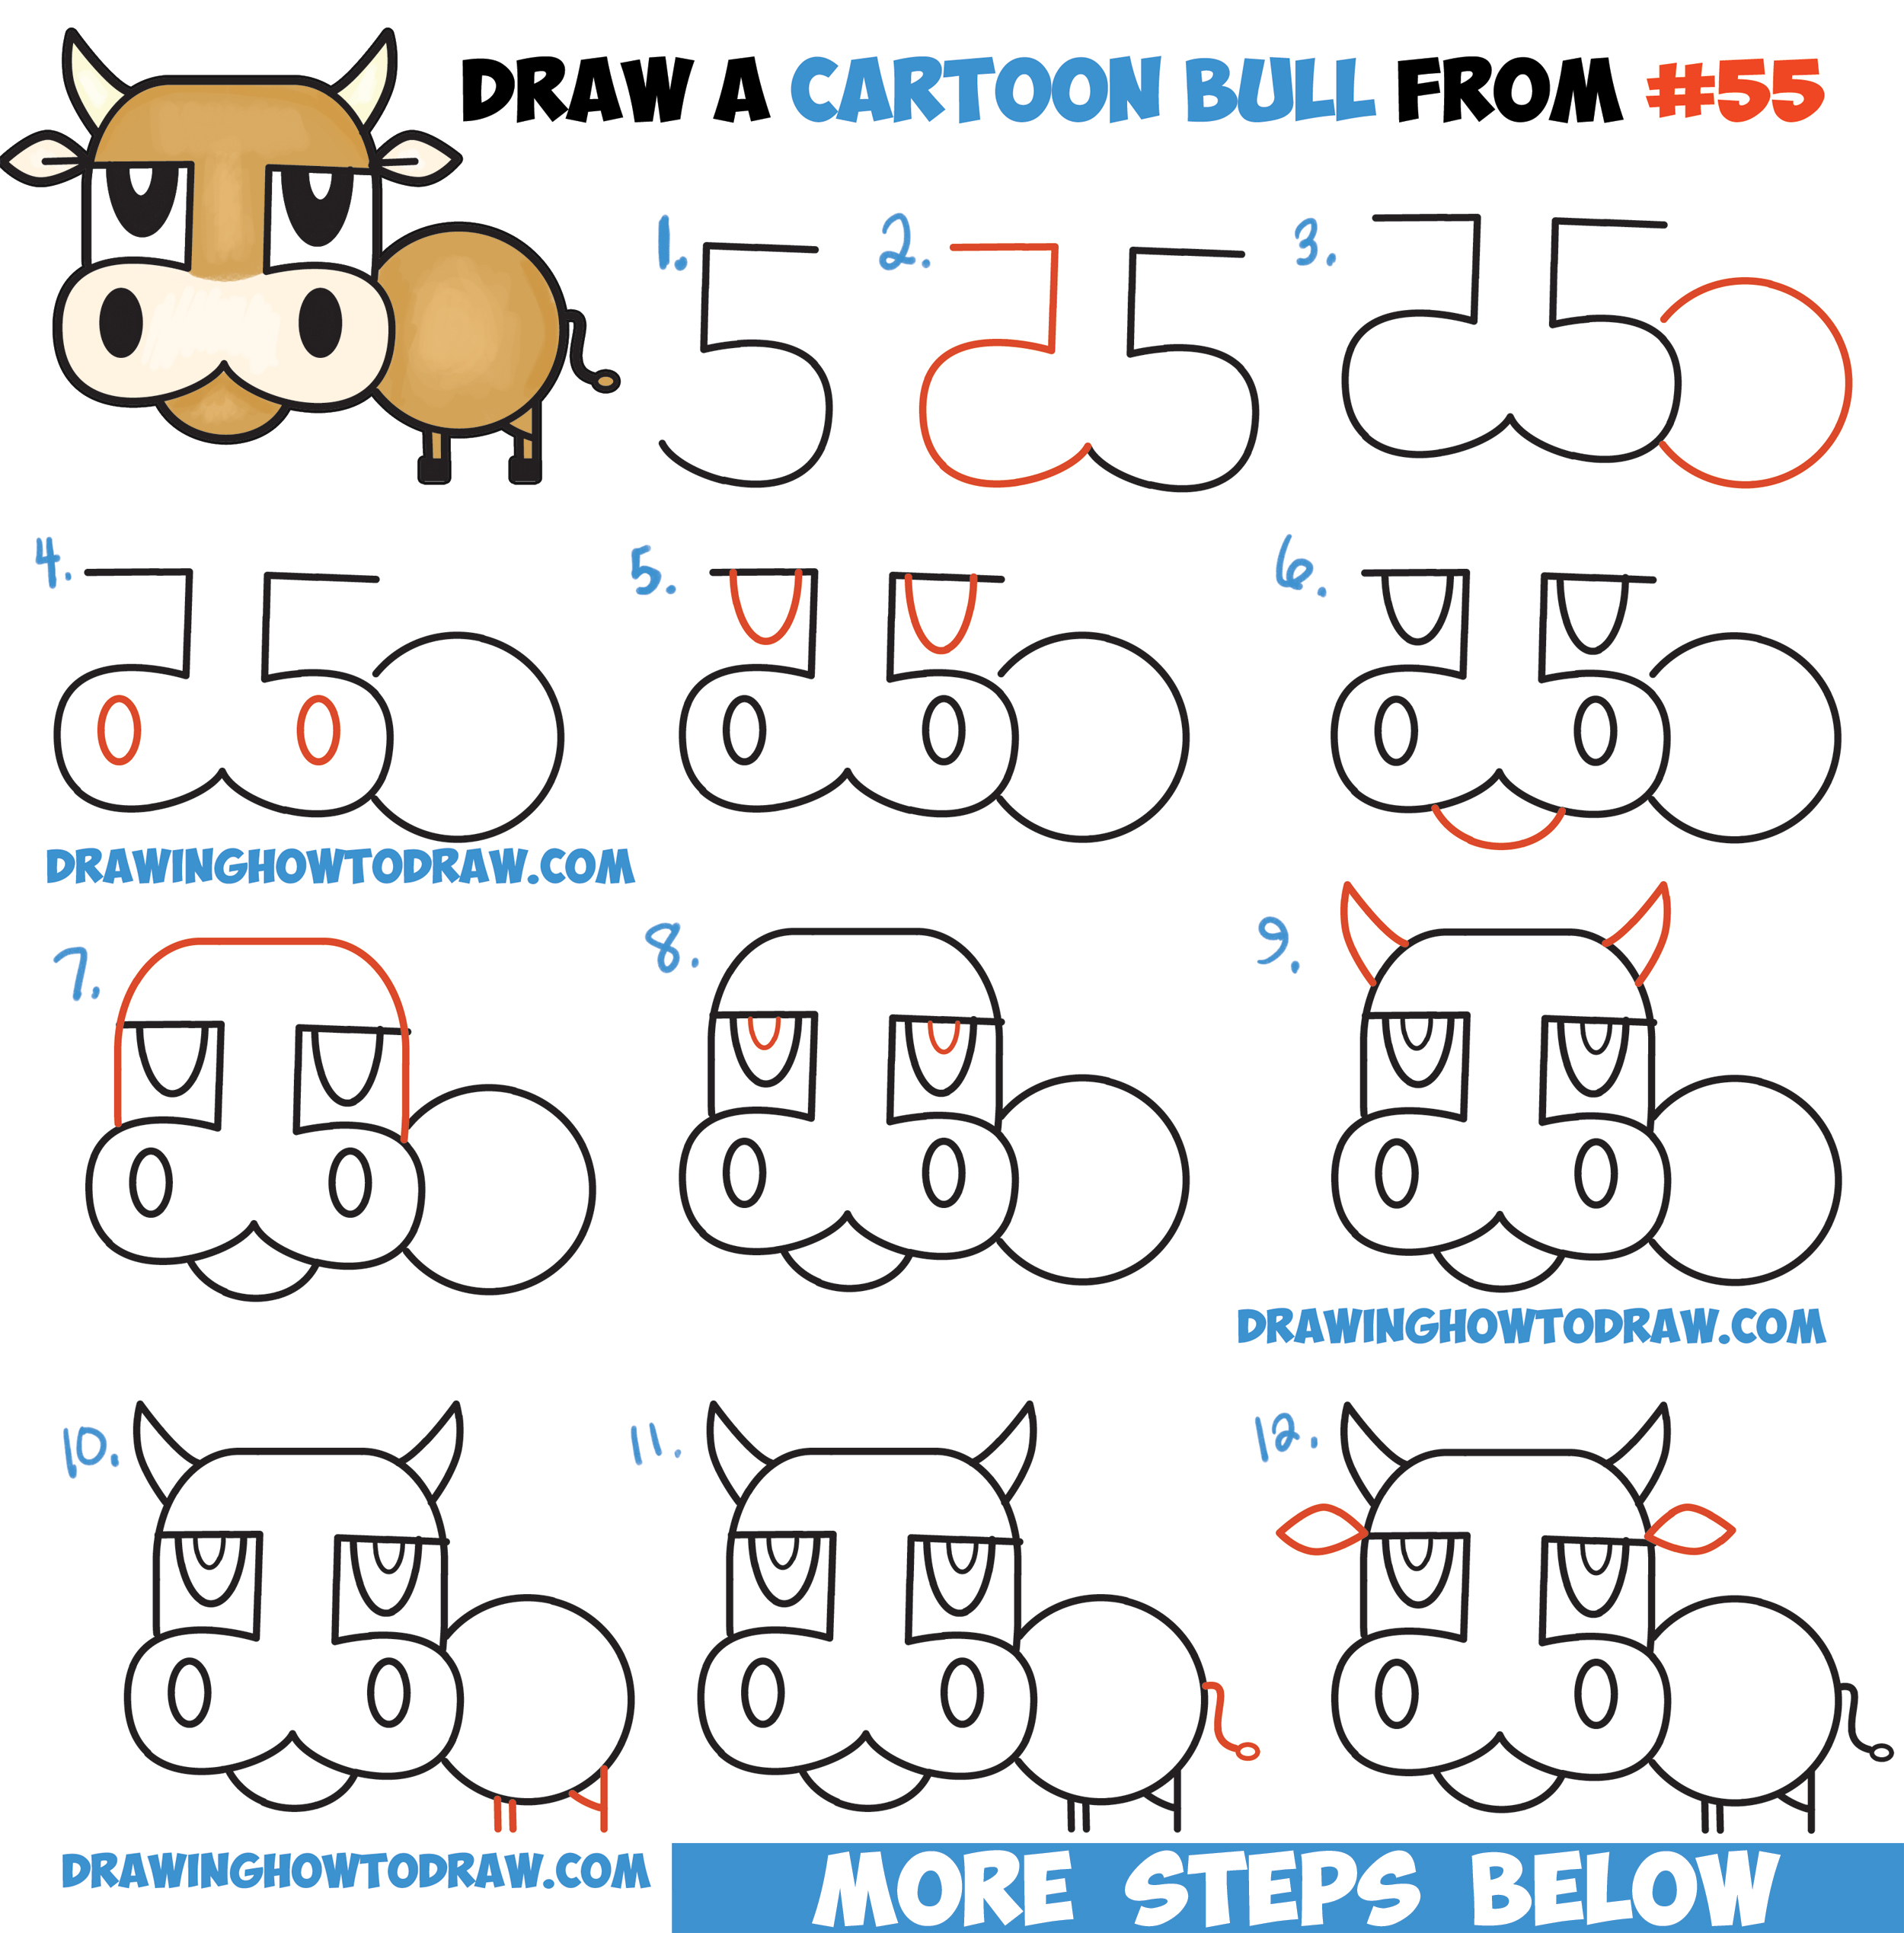 How To Draw A Cartoon Bull Cow From Numbers Letters Easy Step By Step Drawing Tutorial For Kids How To Draw Step By Step Drawing Tutorials